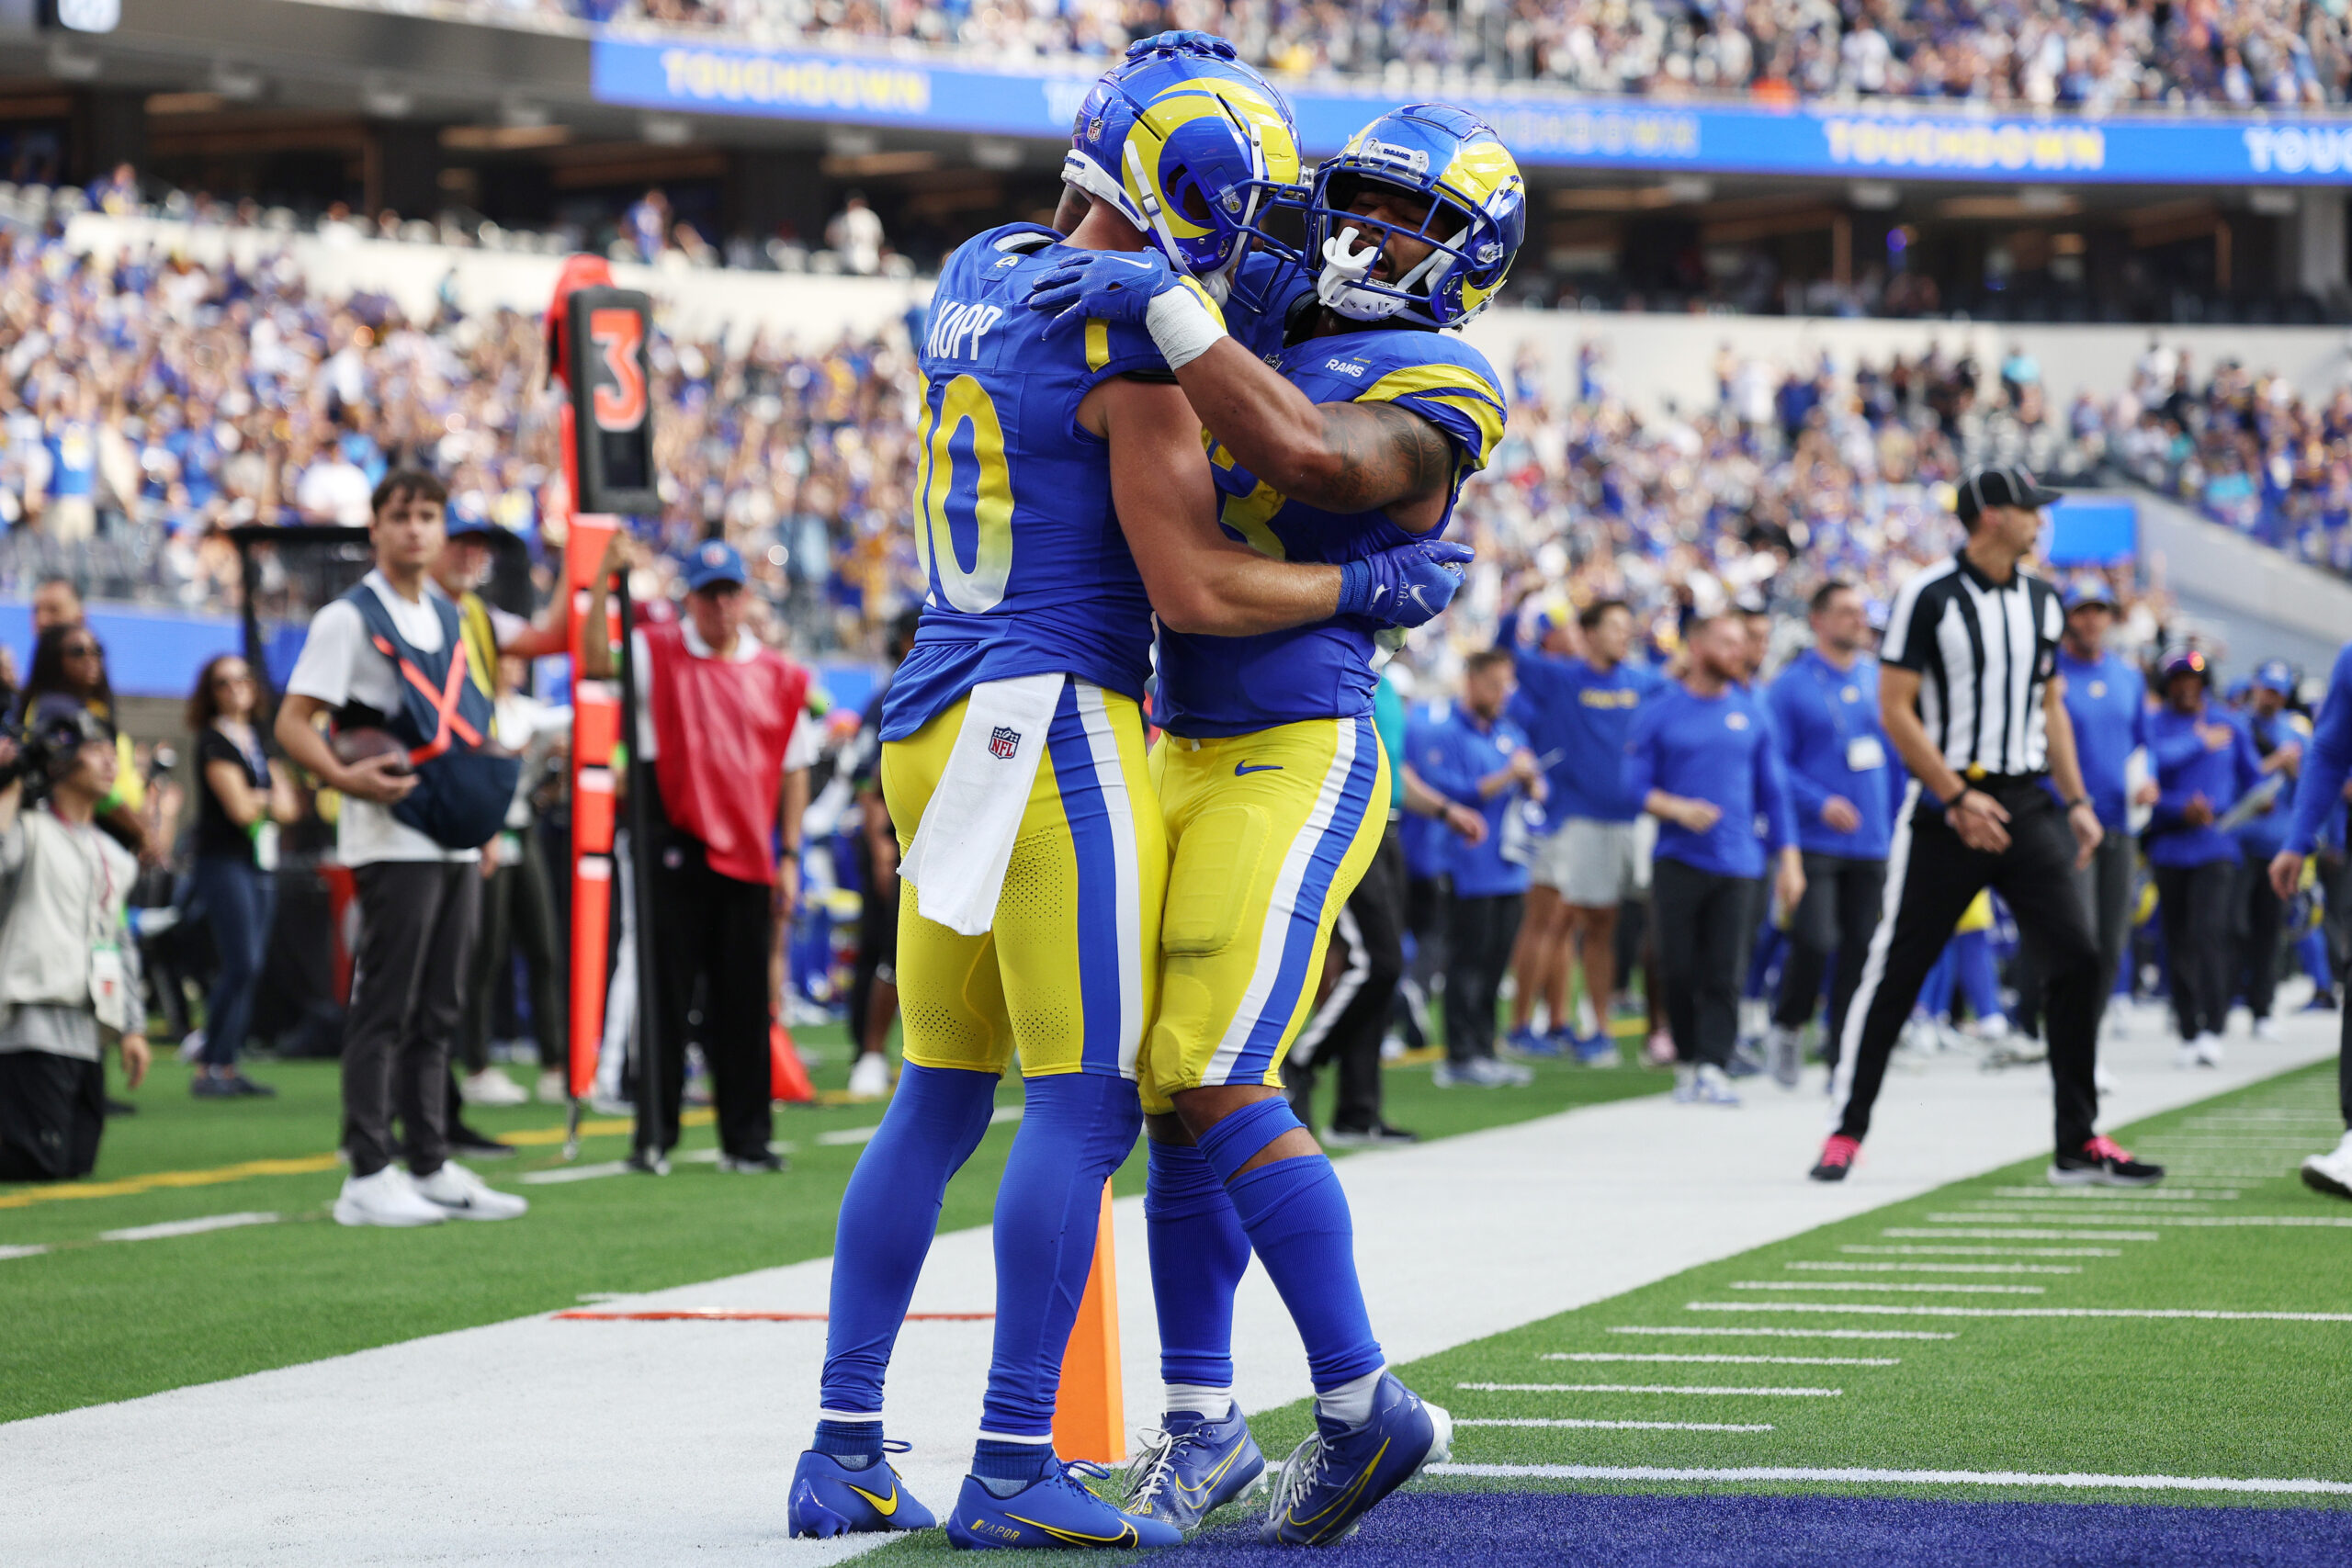 Kyren Williams and Cooper Kupp among 5 players who will sit vs. 49ers in Week 18